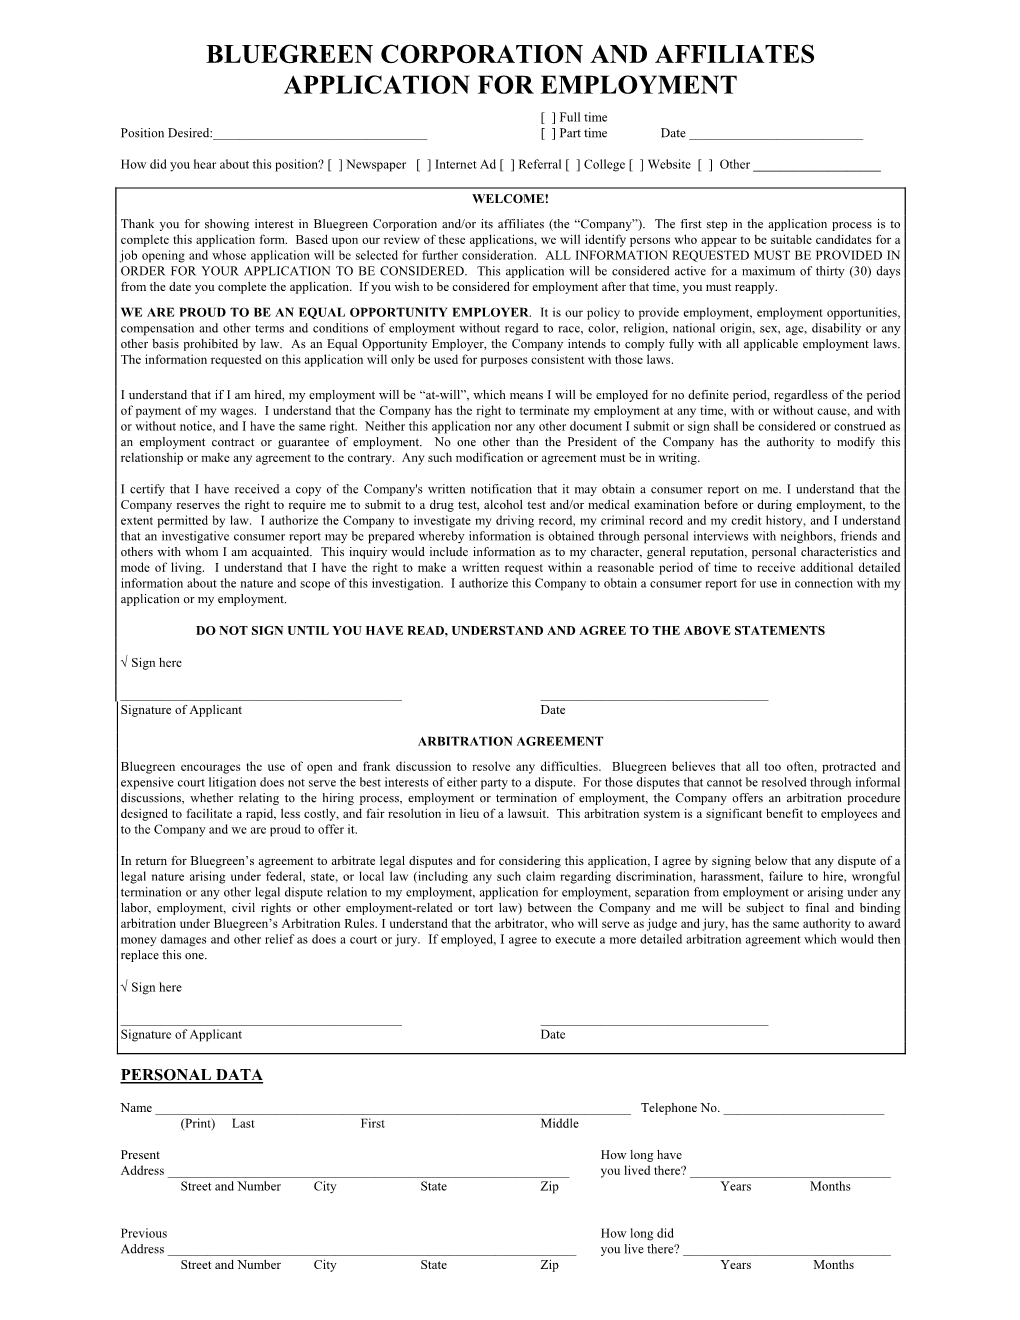 Bluegreen Corporation and Affiliates Application for Employment